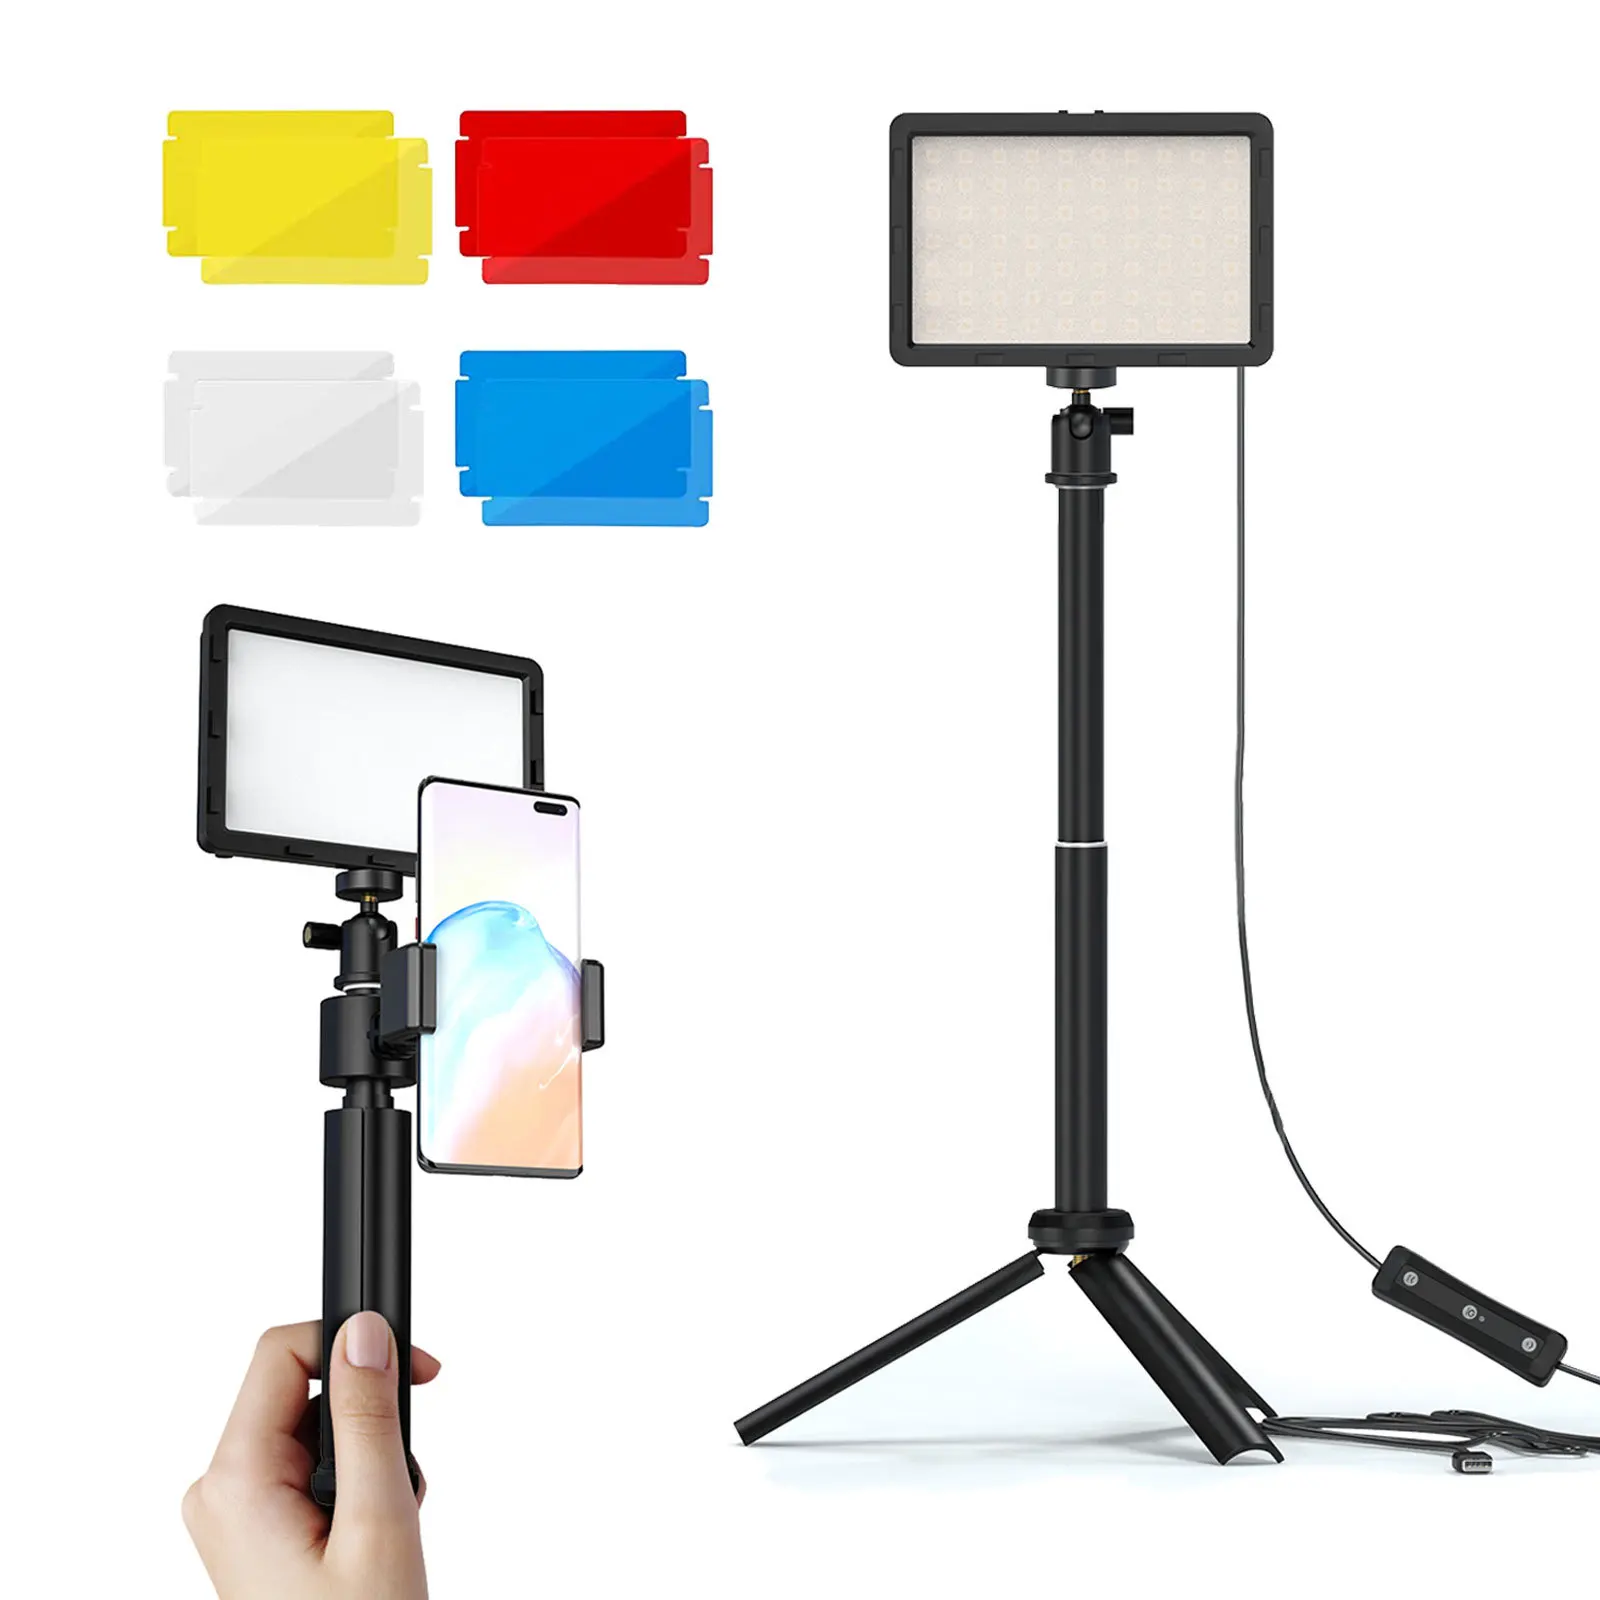 

LED Photo Studio Video Light Panel Lighting Photography Lamp Kit With Tripod Stand RGB Filters For Shoot Live Streaming Youbube